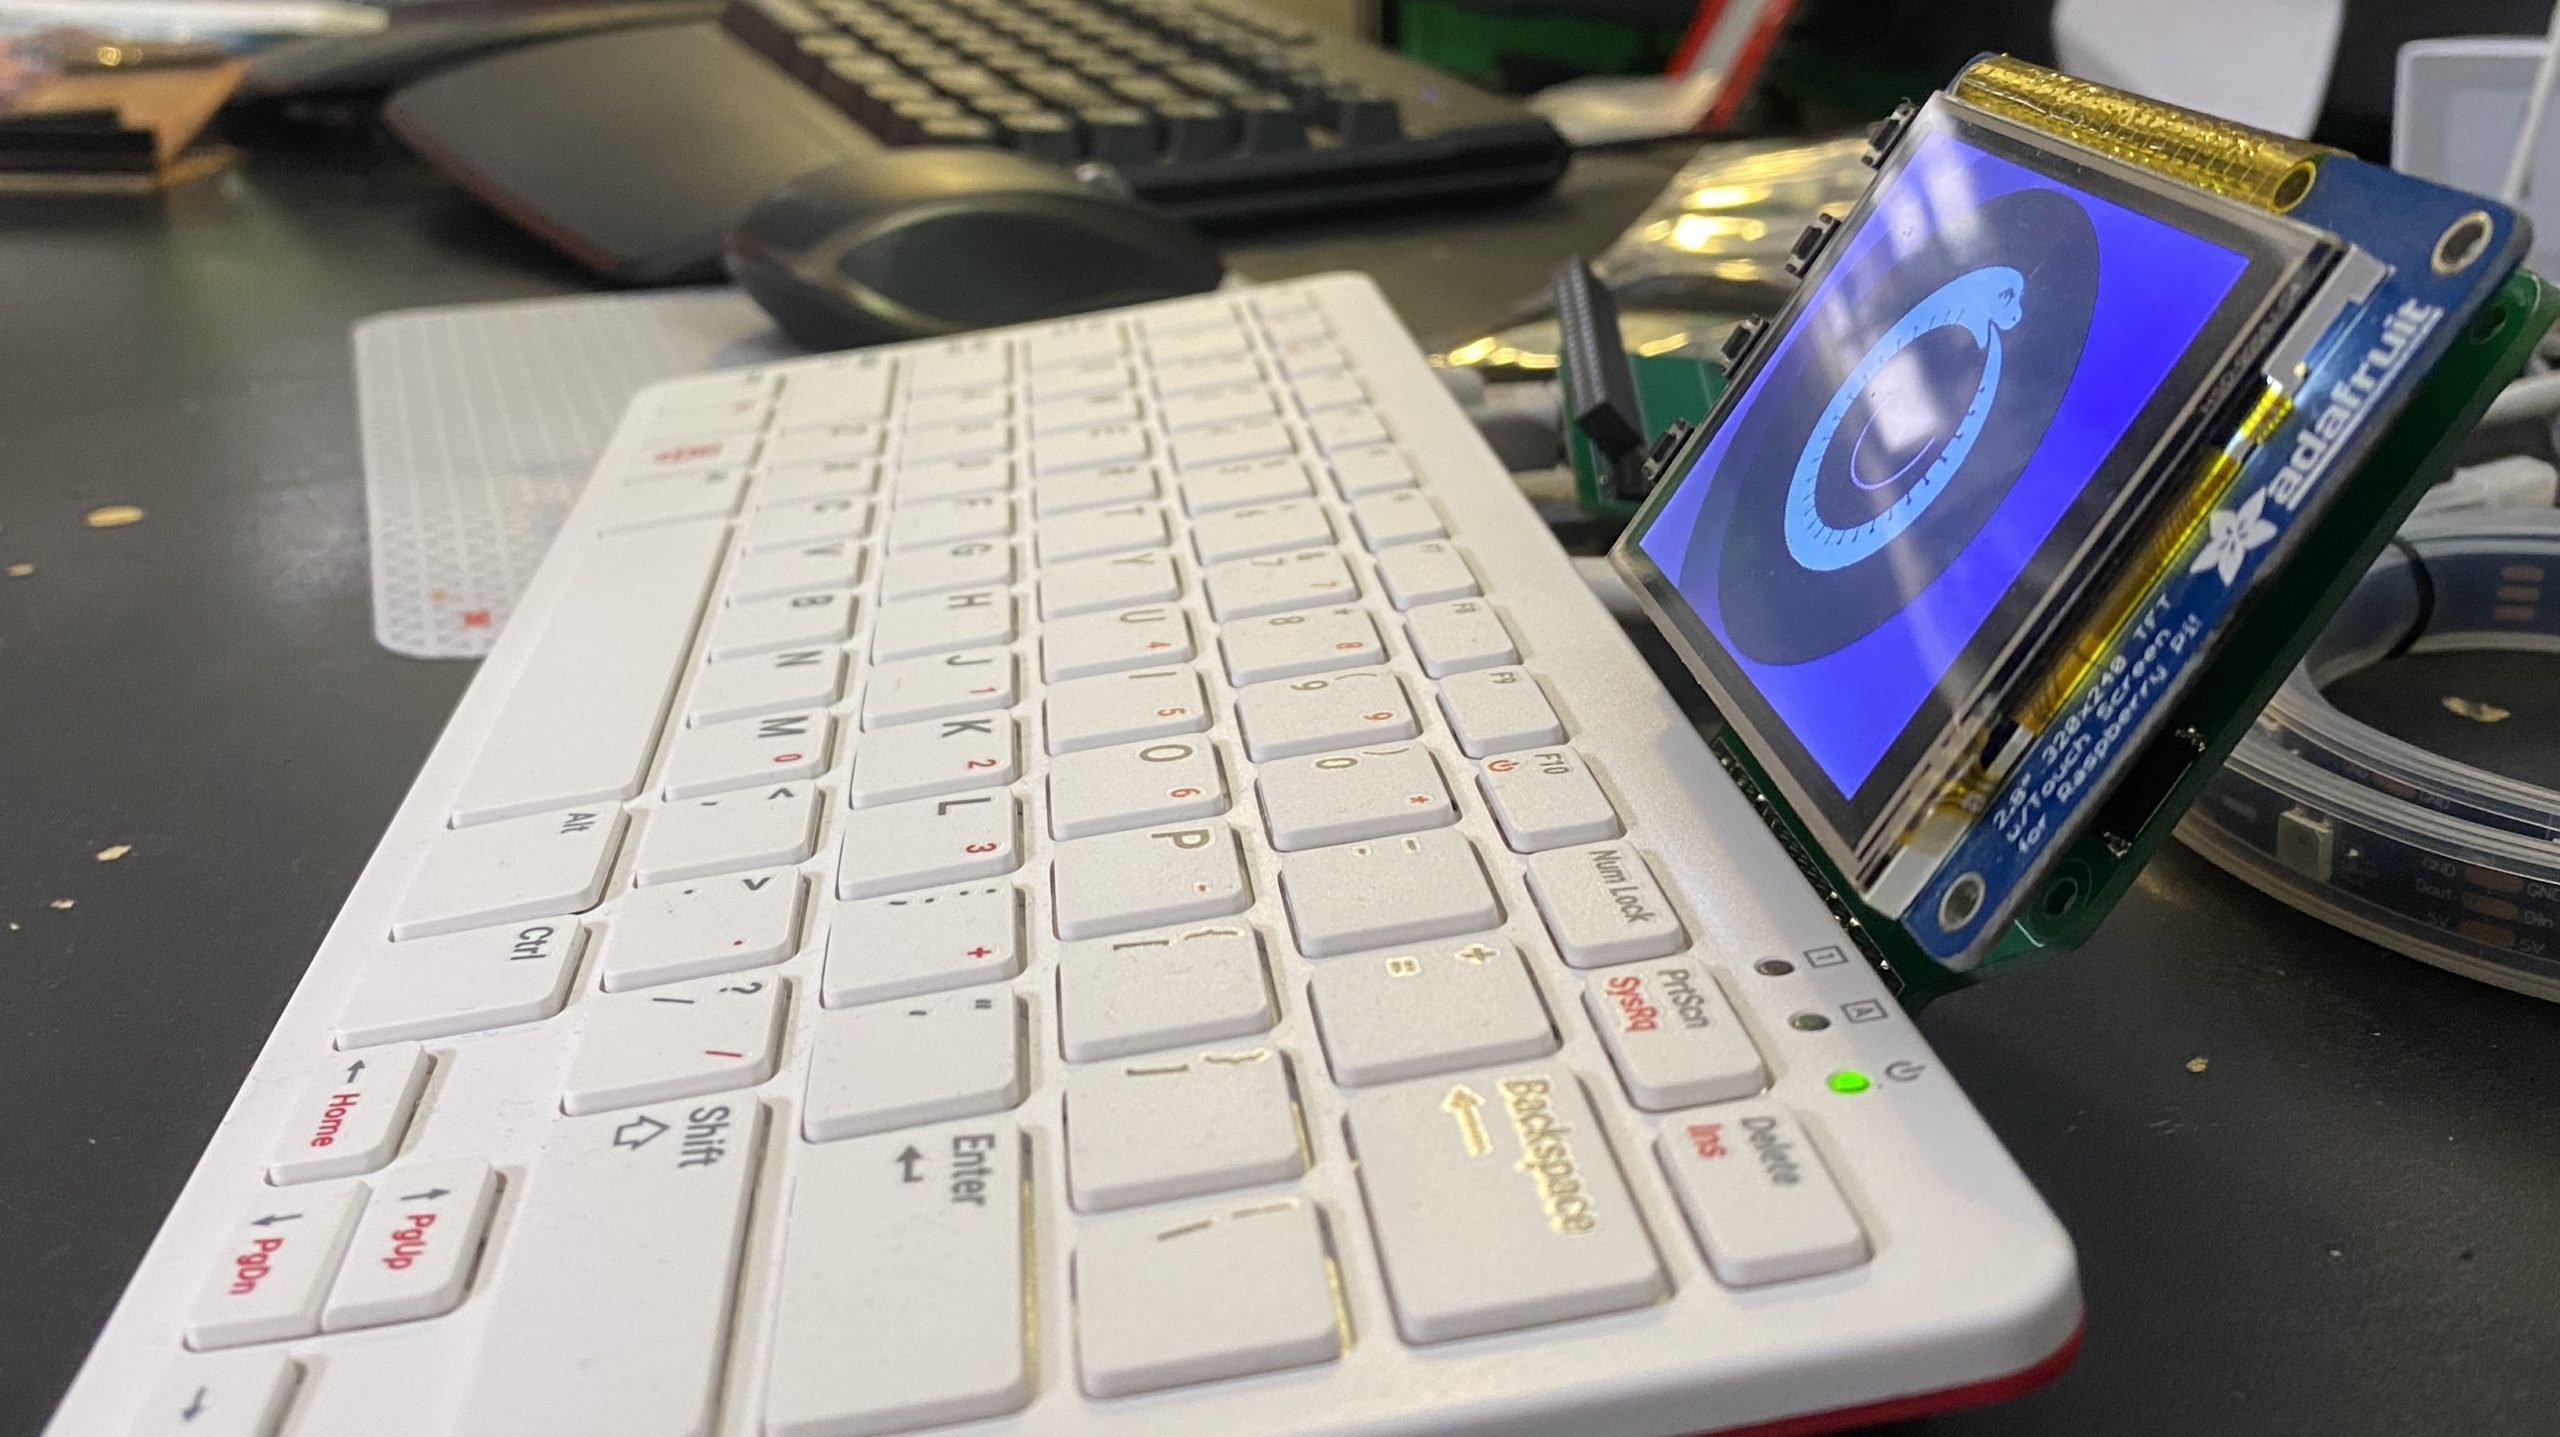 adafruit-aims-to-cyberdeck-your-raspberry-pi-400